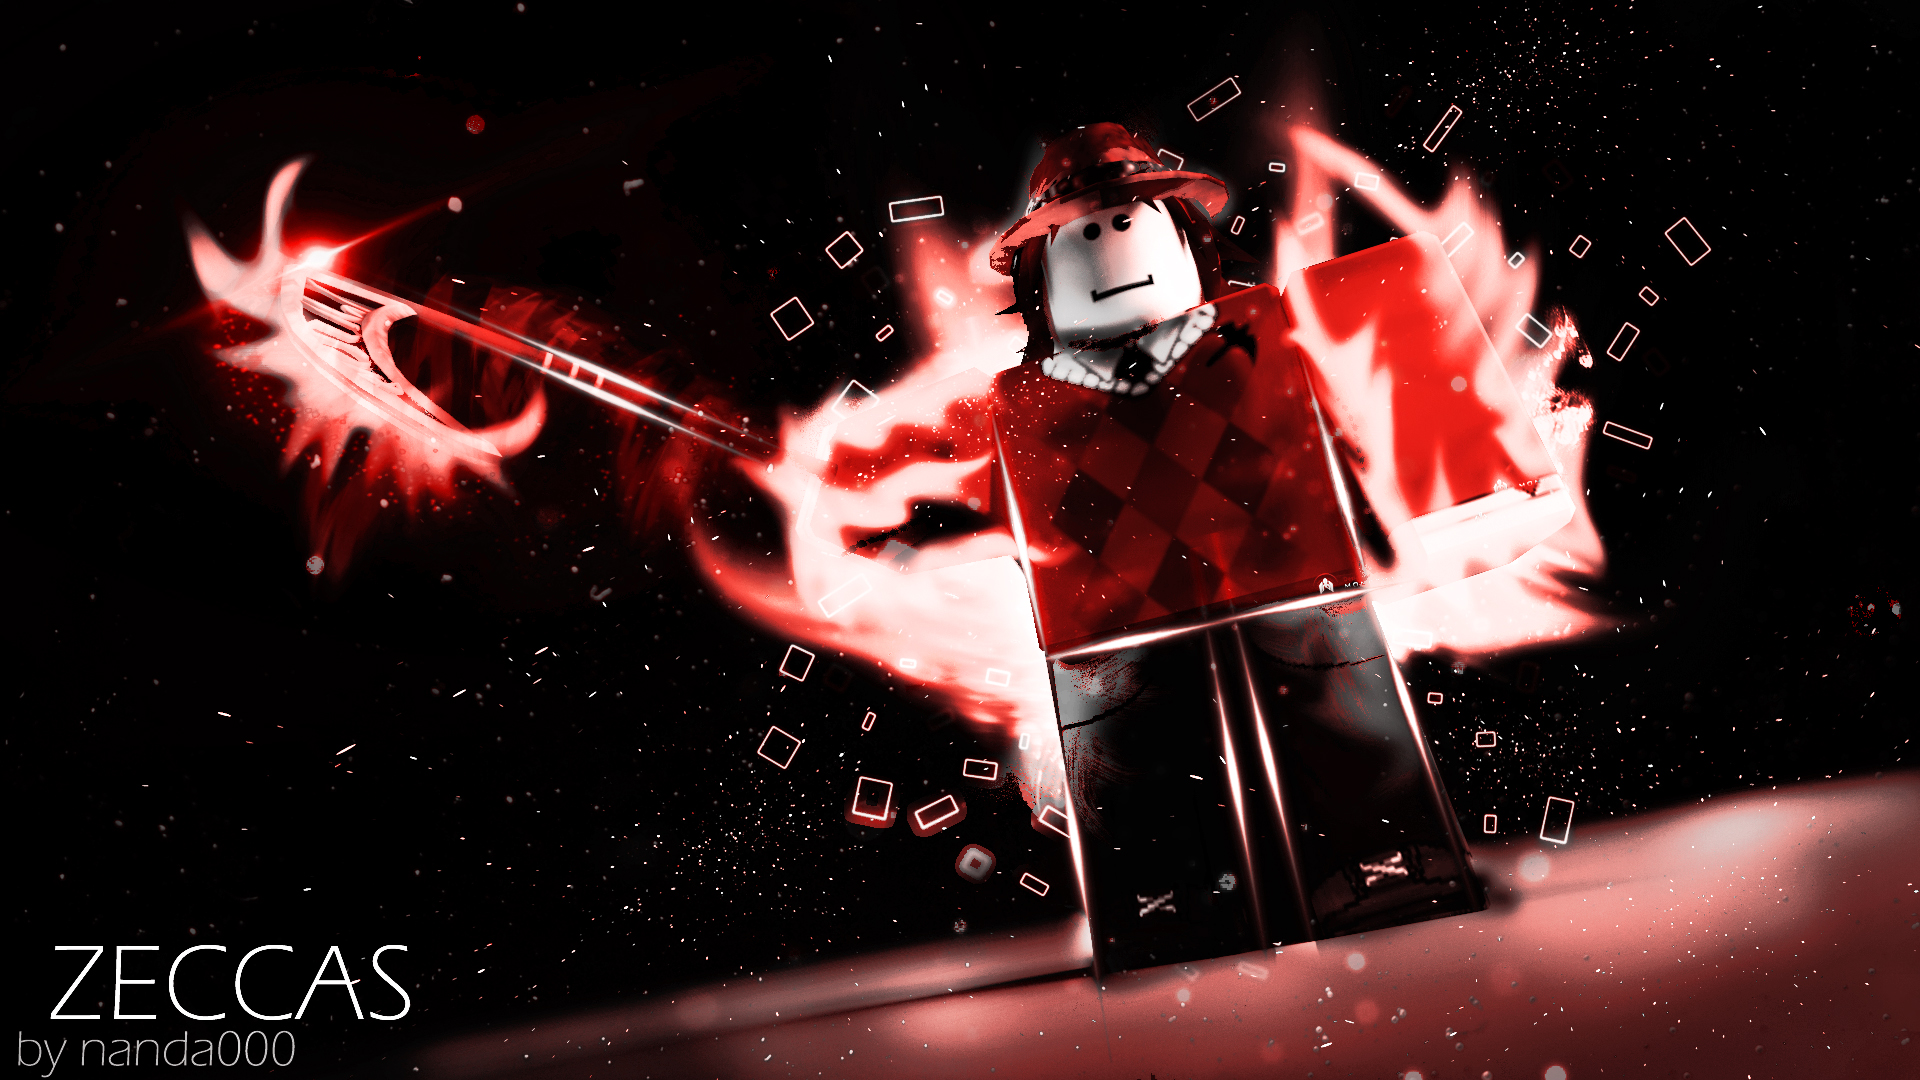 A Roblox Gfx By Nanda000 For Zeccasagain By Nandamc On - a roblox gfx by nanda000 for clickmyname updated by